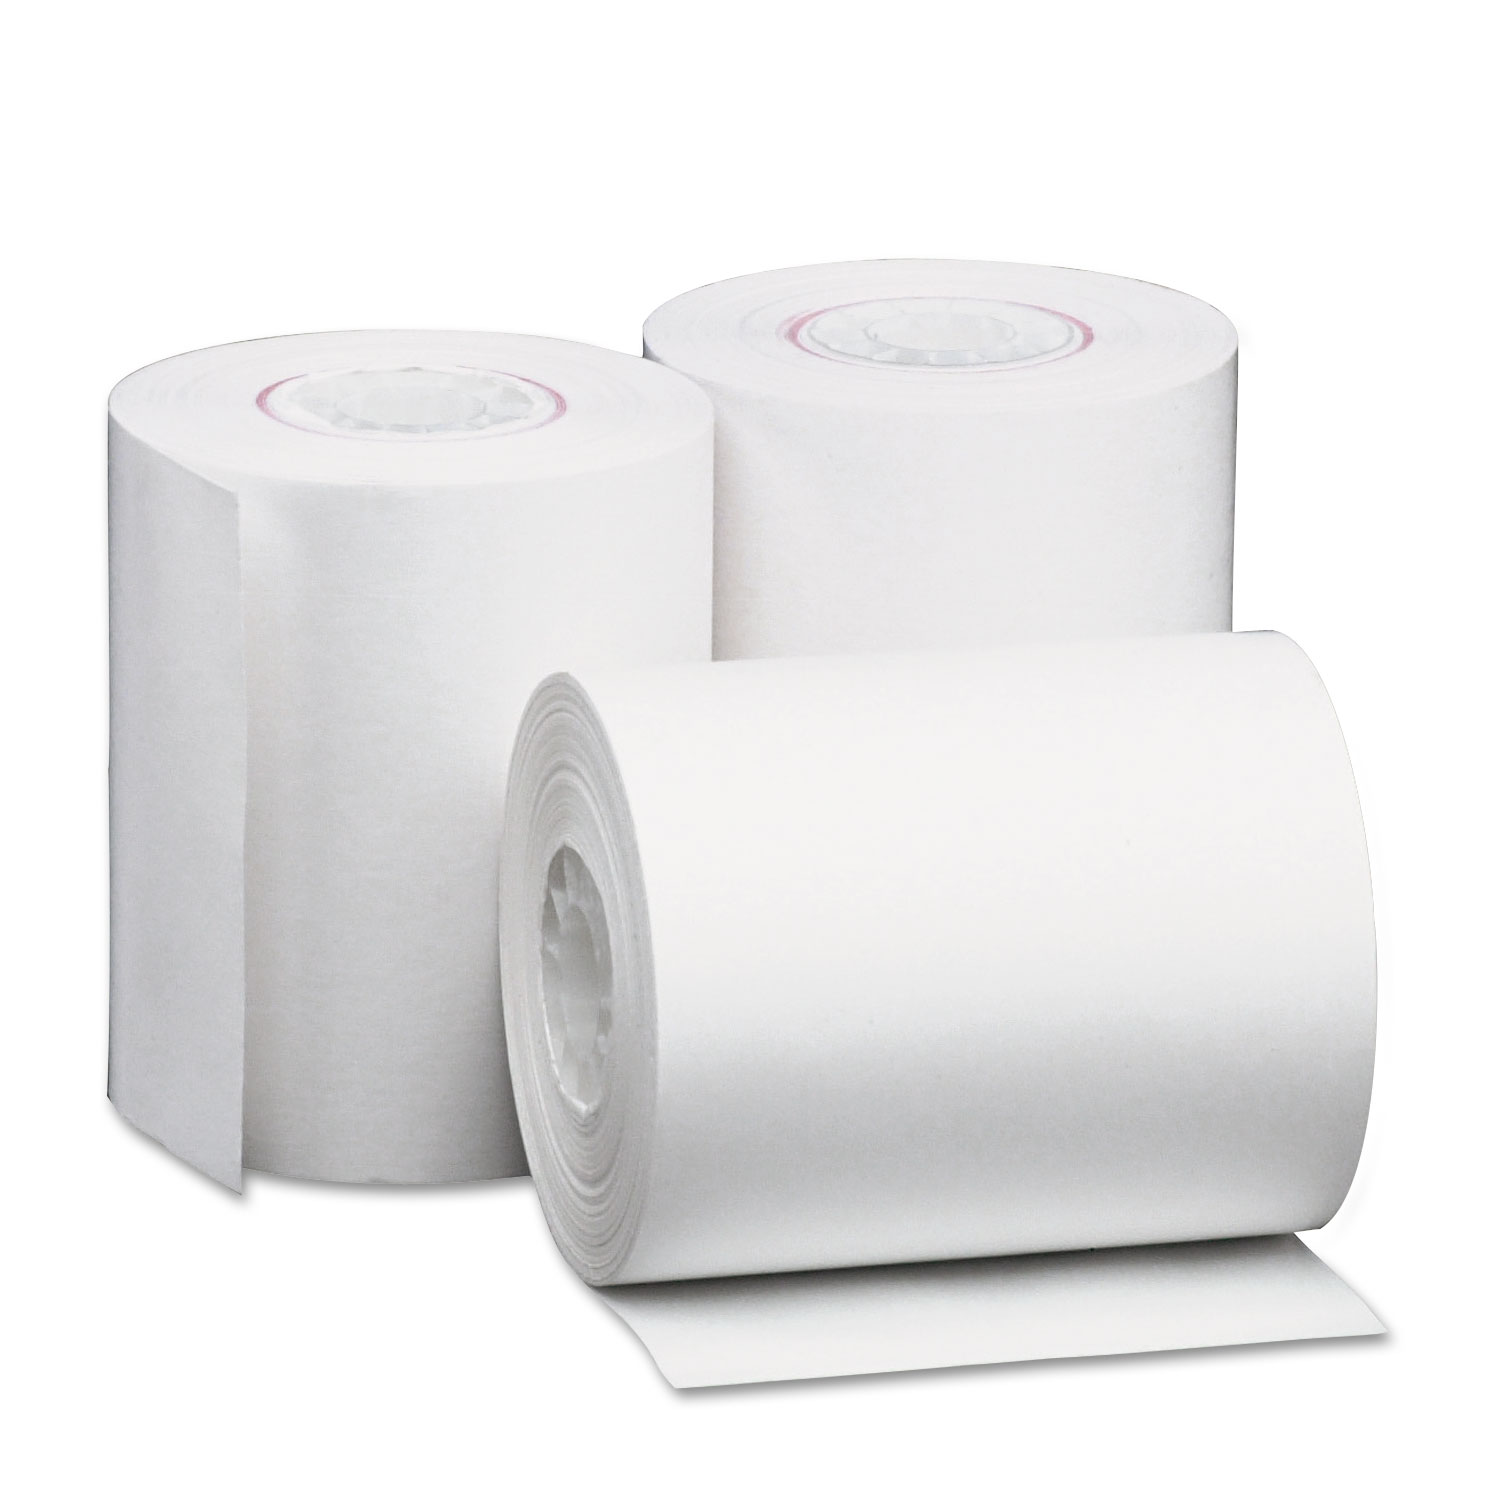 Single-Ply Thermal Paper Rolls, 2 1/4 x 80 ft, White, 50/Carton